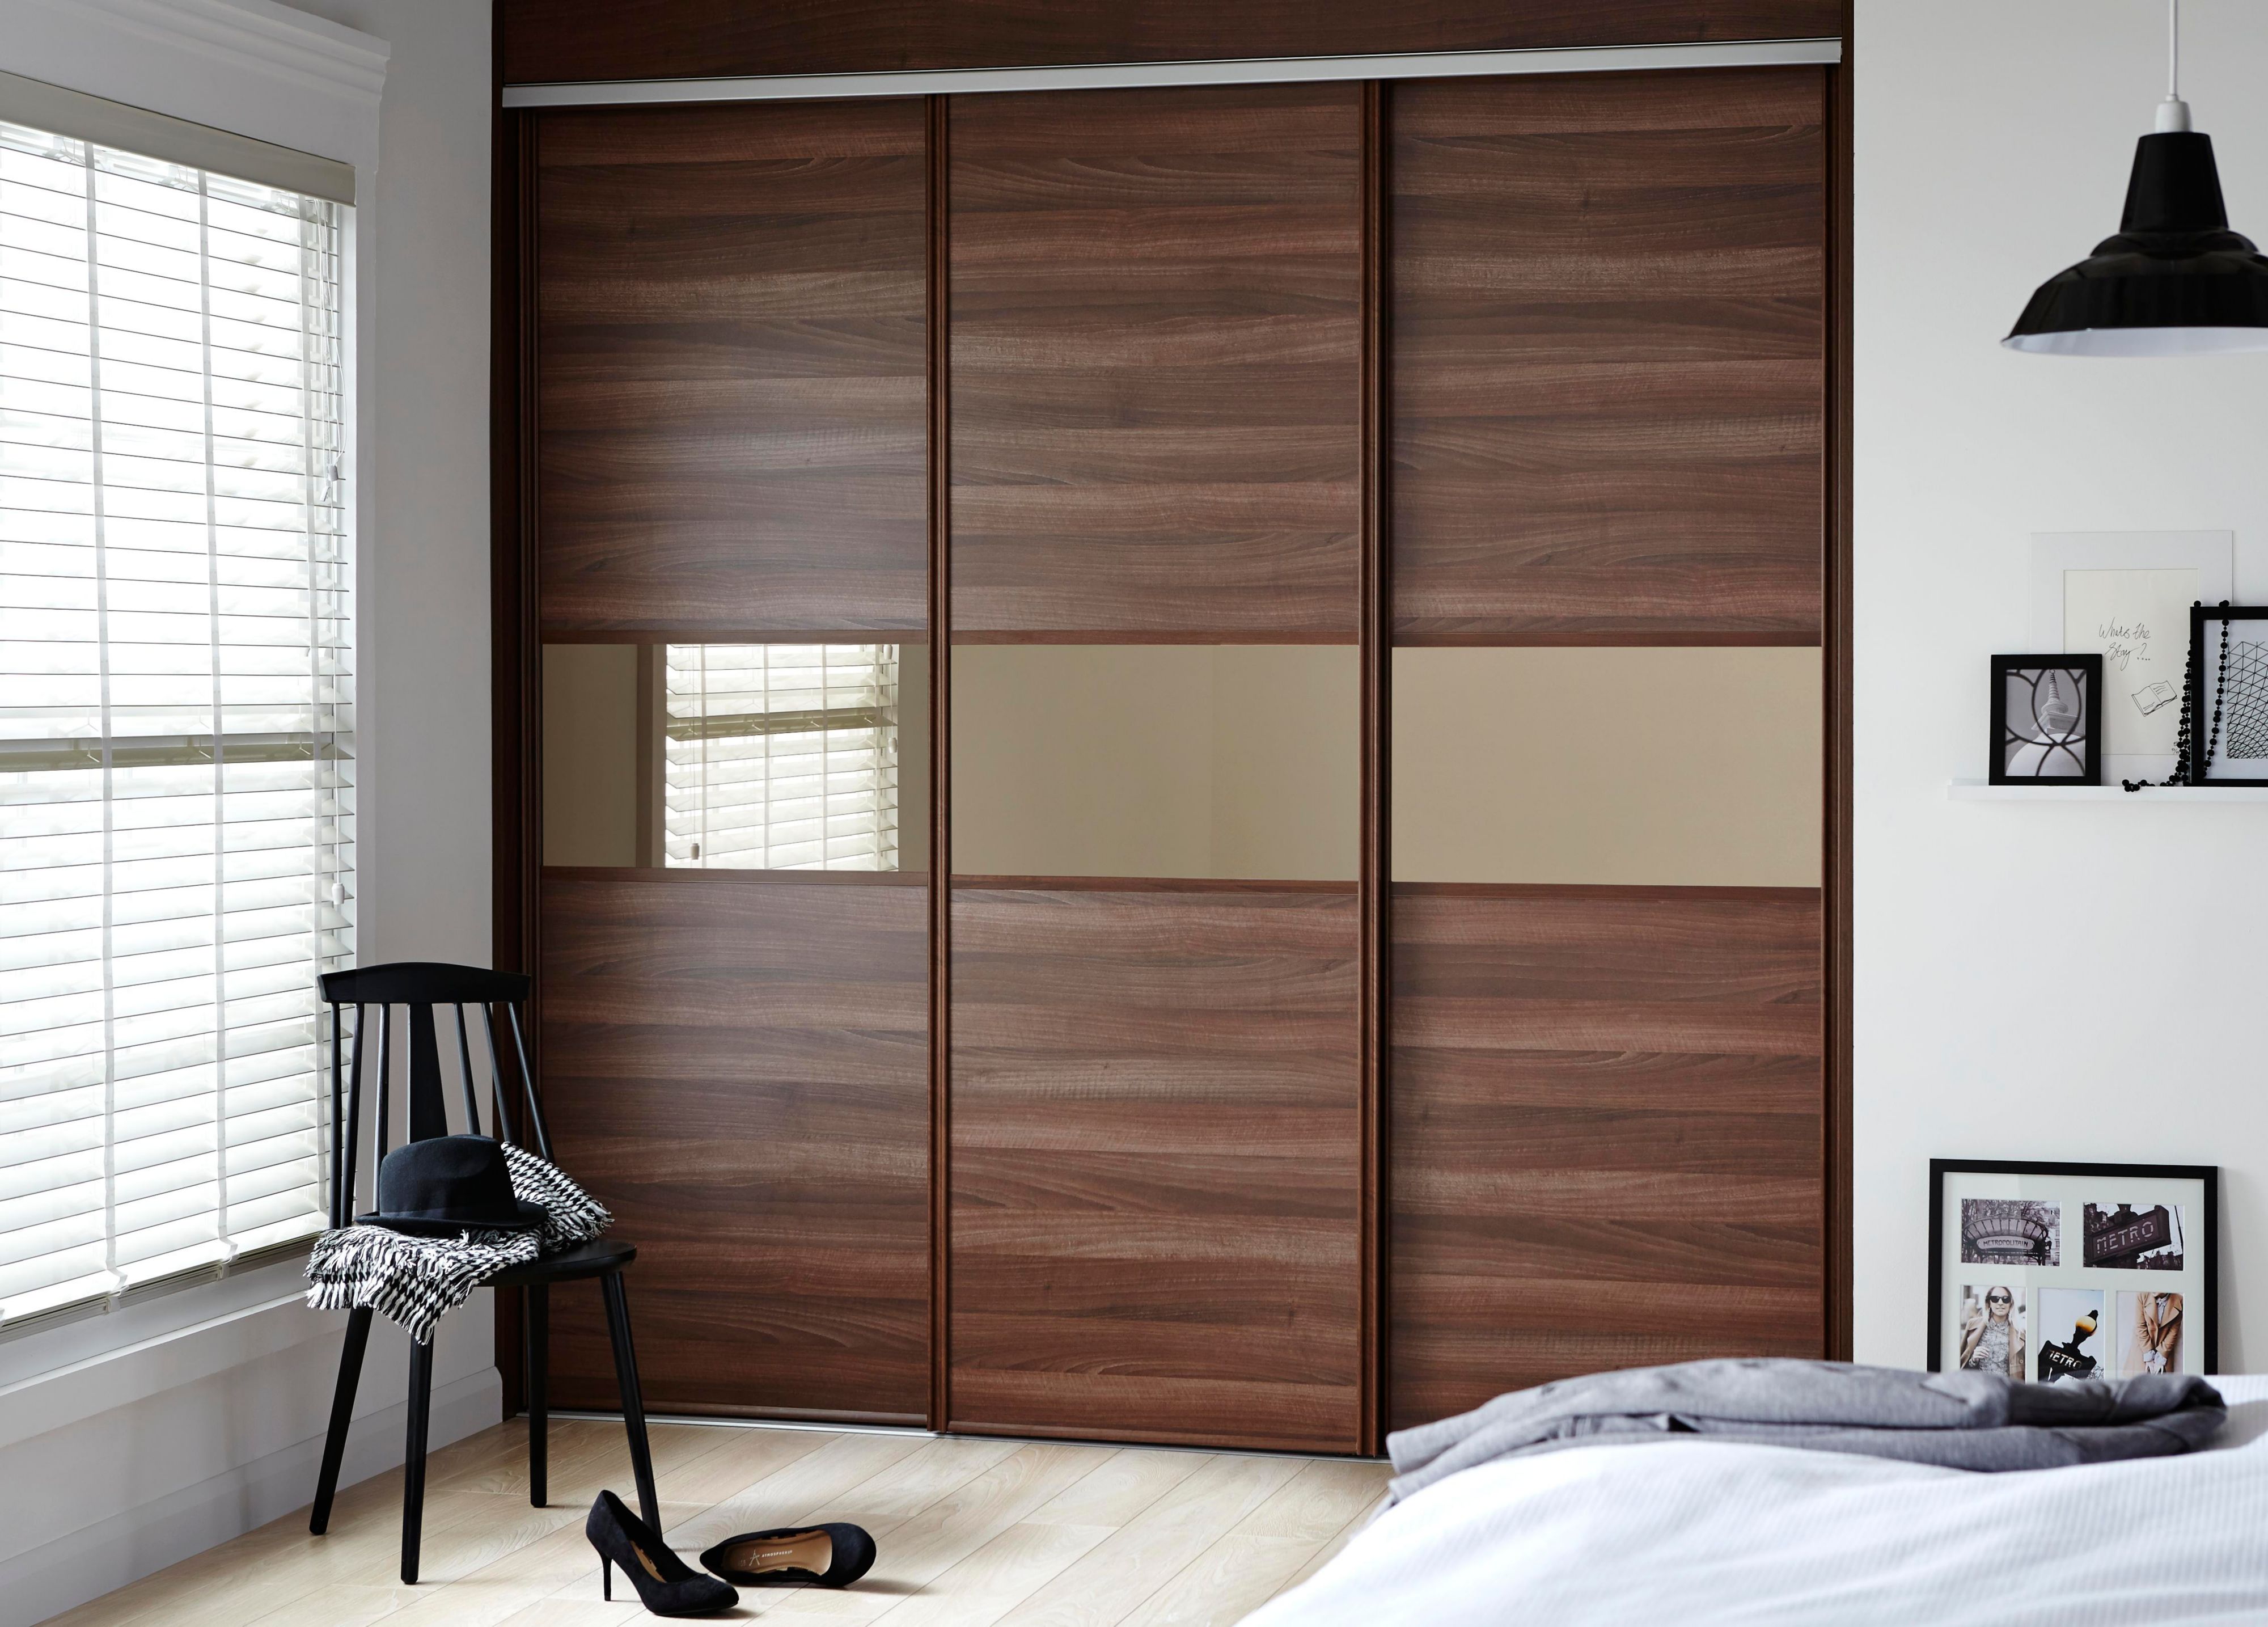 Wardrobe with sliding doors 1. add a beautiful look to your bedroom: MFADRNT